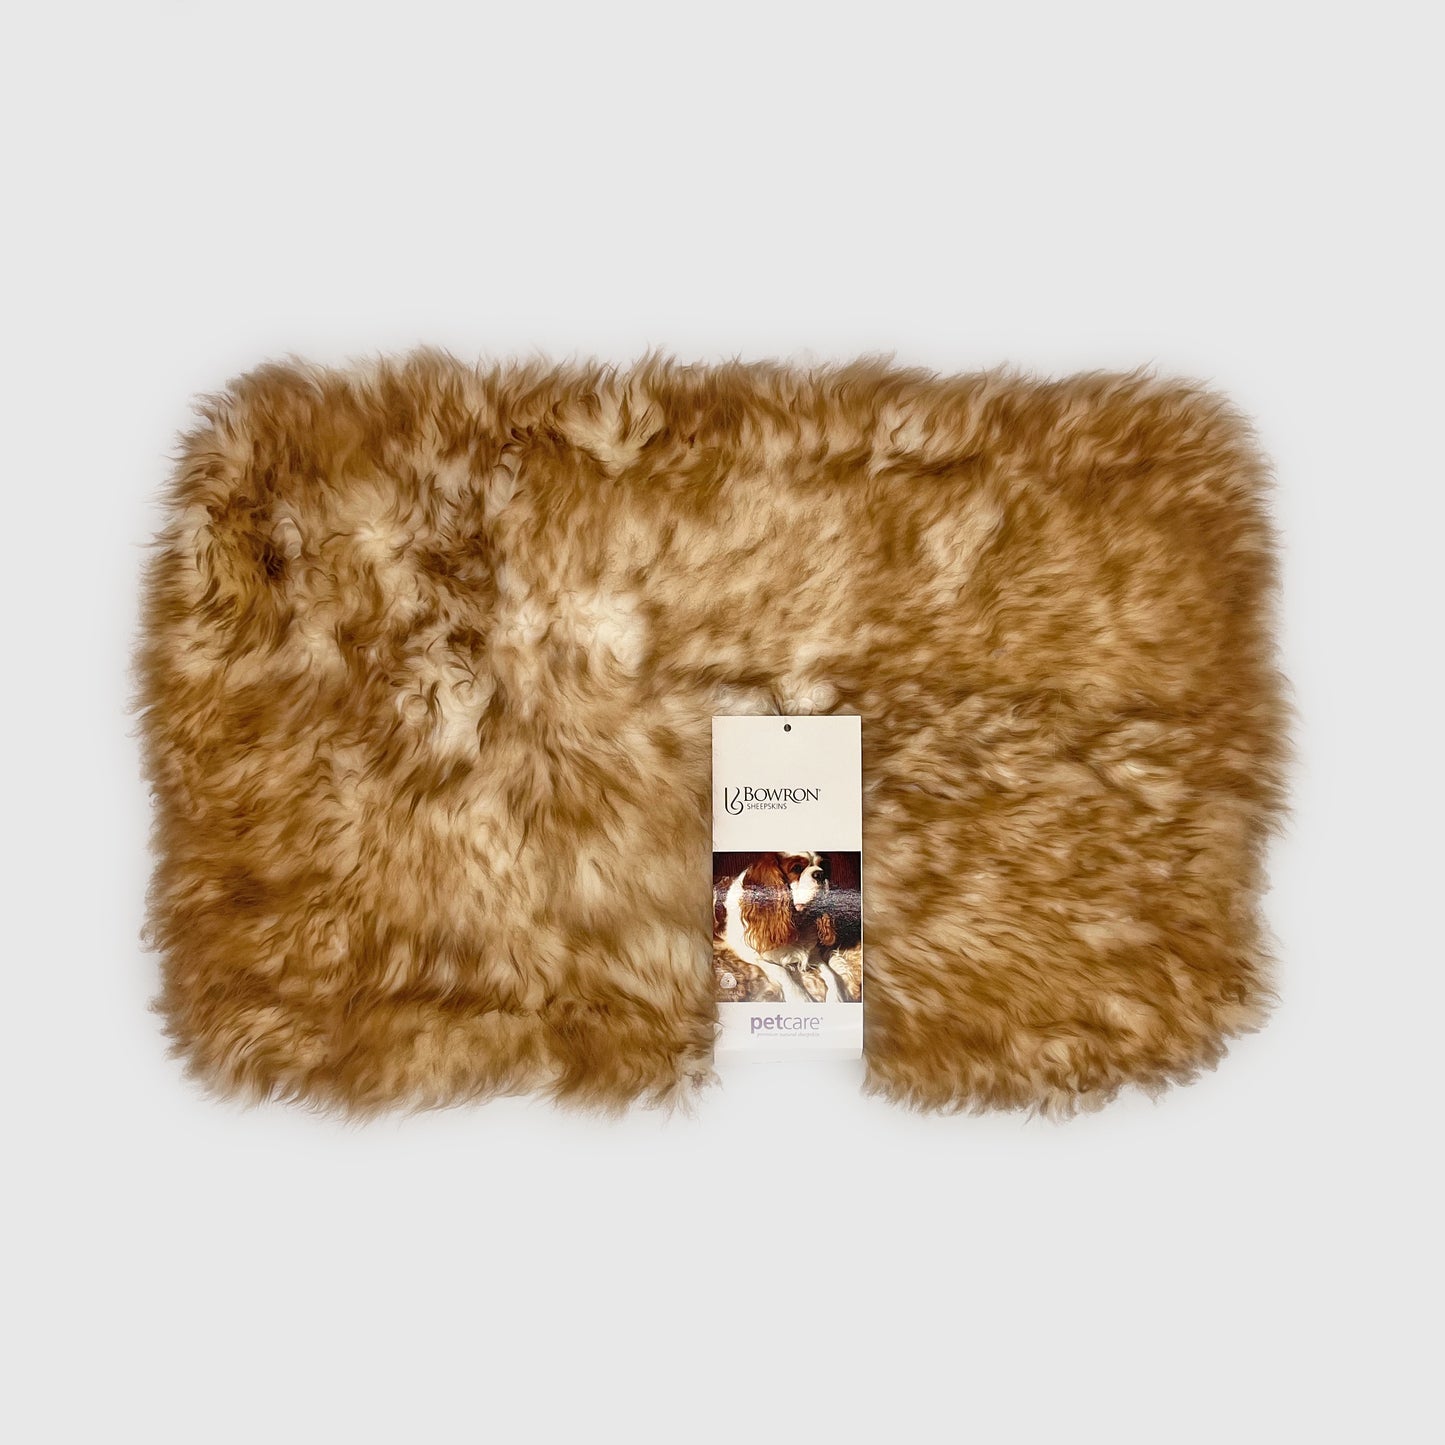 Bowron PetCare Sheepskin Pet Bed, Eclipse (Brown/Ivory), 14x22 in.